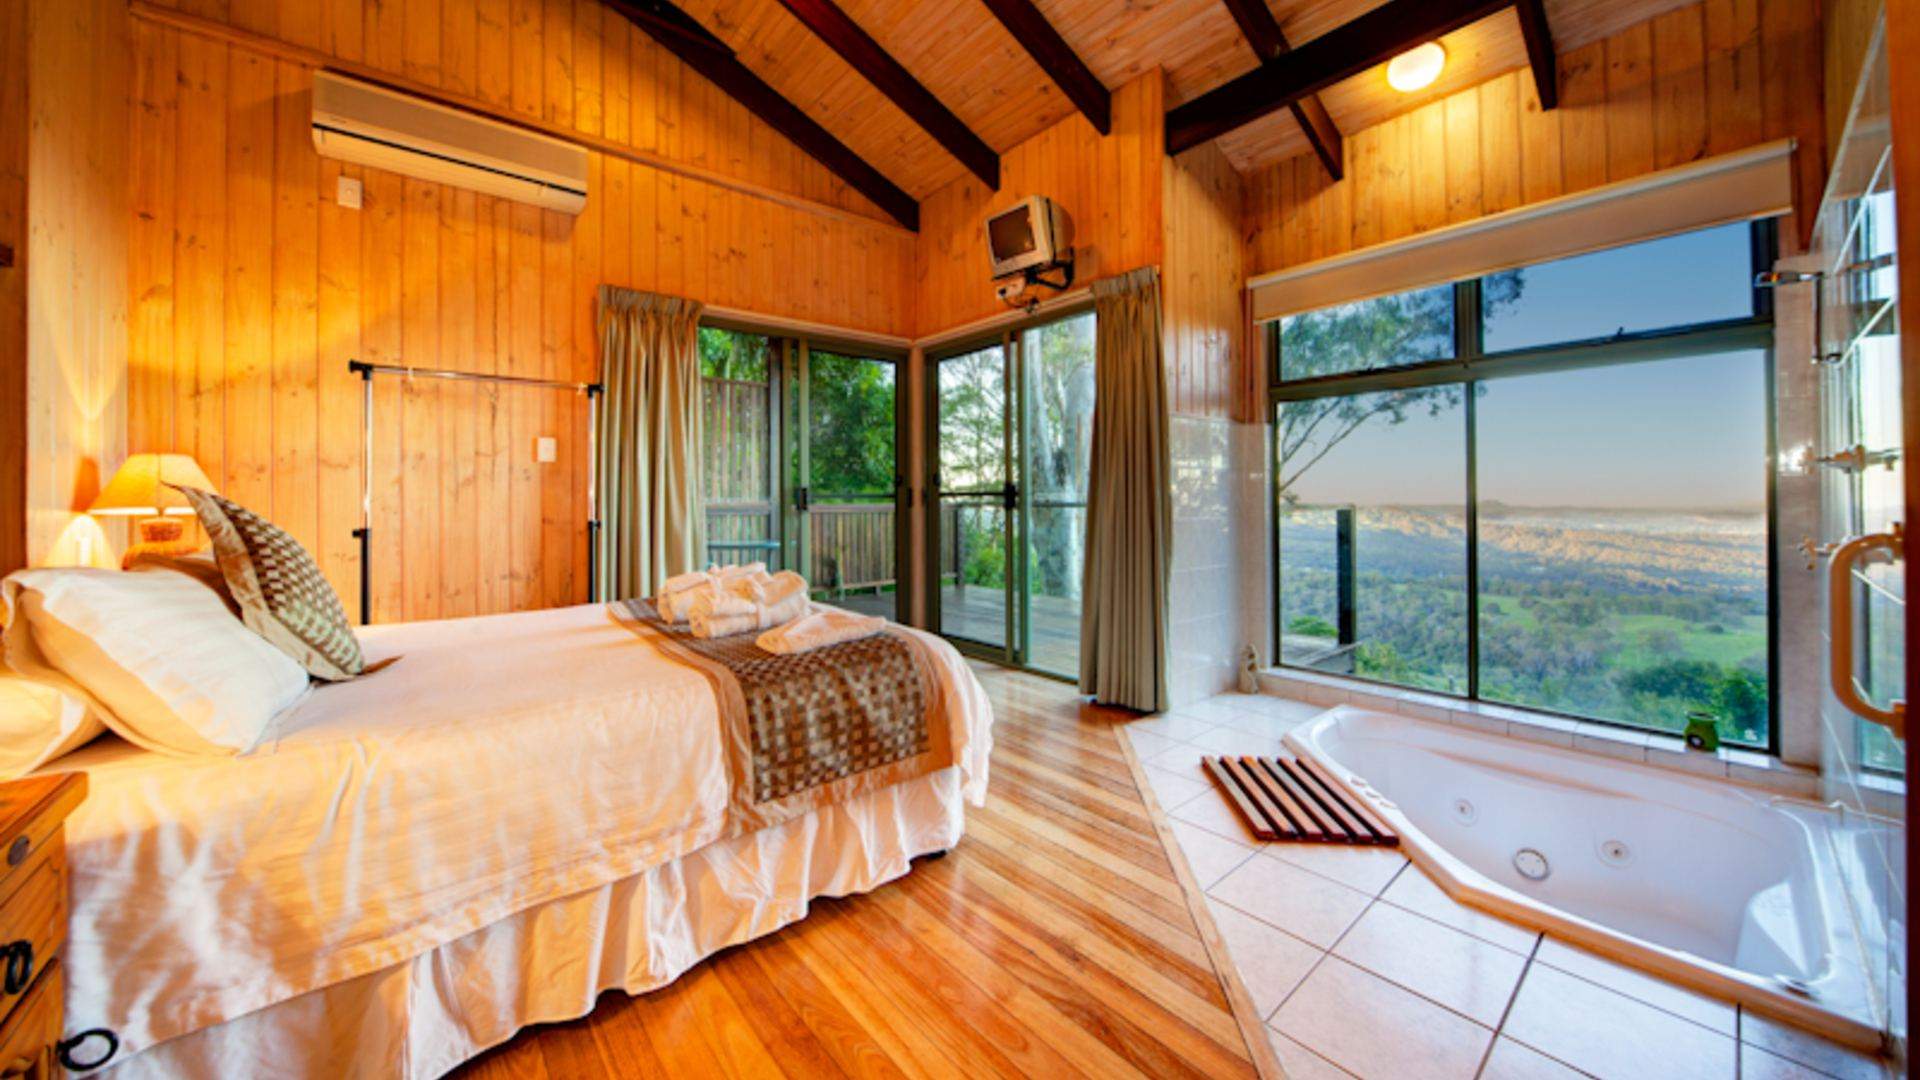 The Most Secluded Retreats You Can Book In The Sunshine Coast Hinterland Concrete Playground